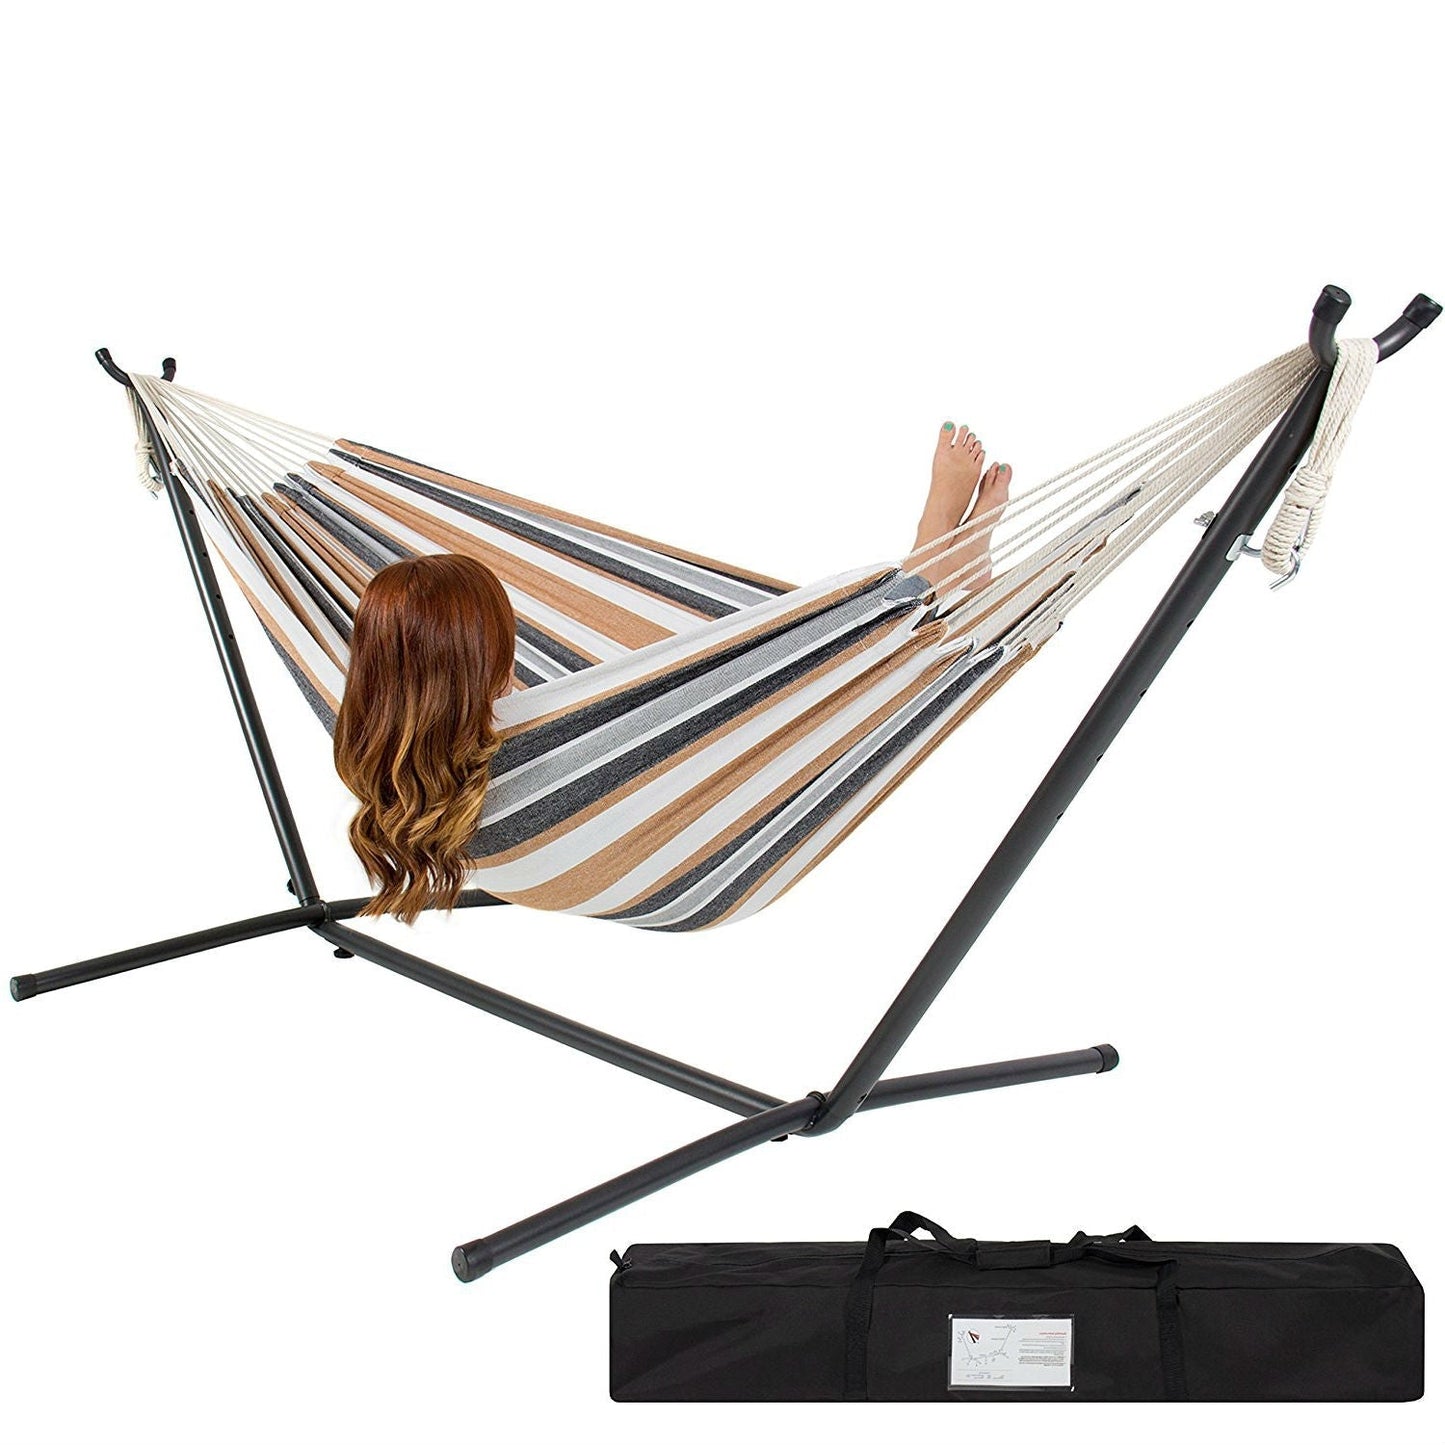 Outdoor > Outdoor Furniture > Hammocks - Portable Cotton Hammock In Desert Strip With Metal Stand And Carry Case